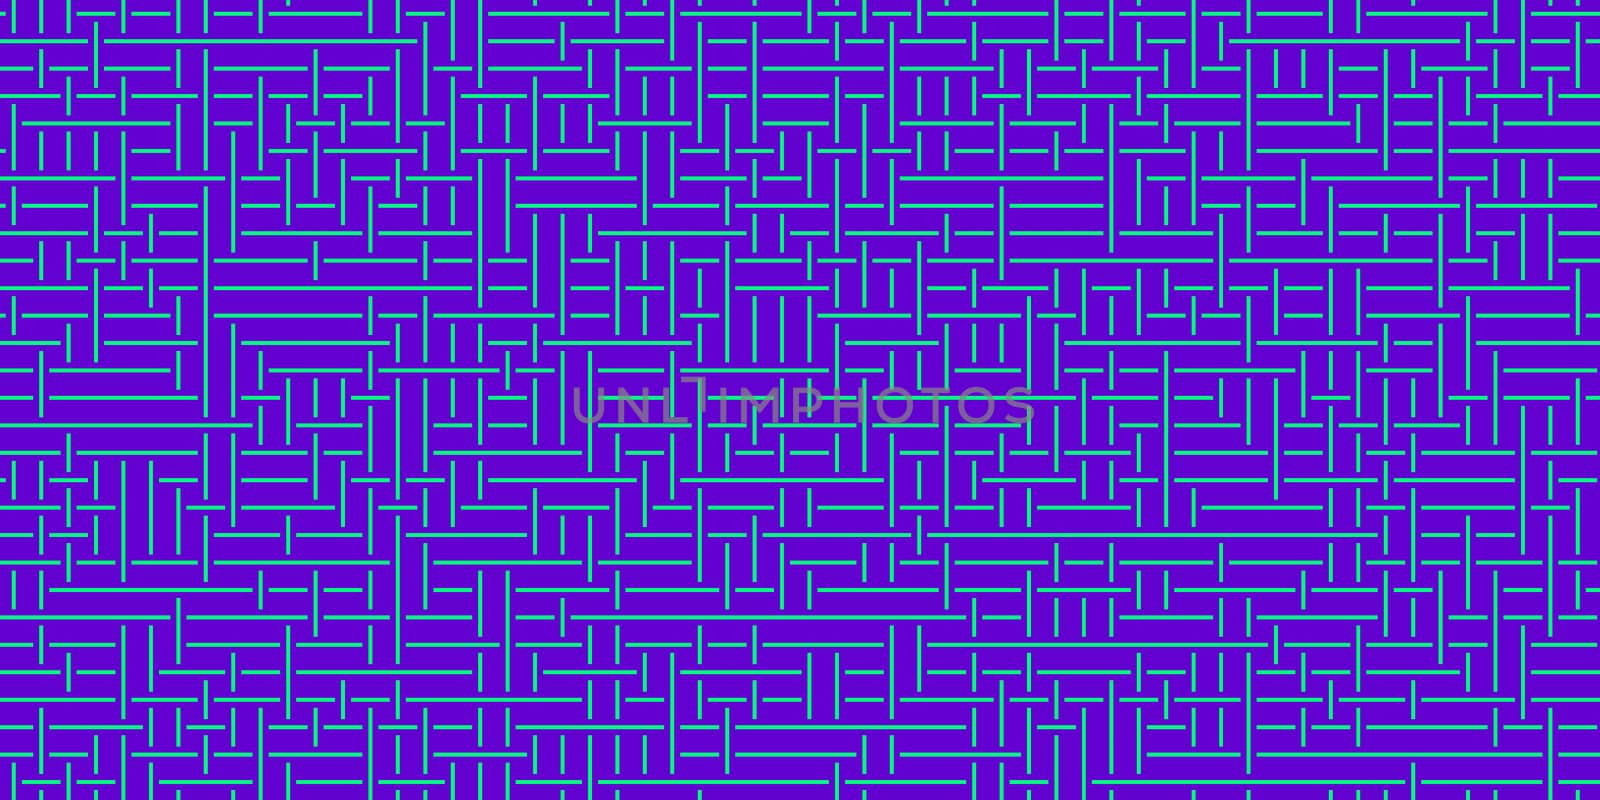 Blue Violet Turquoise Seamless Outline Labyrinth Background. Maze Path Puzzle Concept. Difficulty Logical Mind Creativity Abstraction.